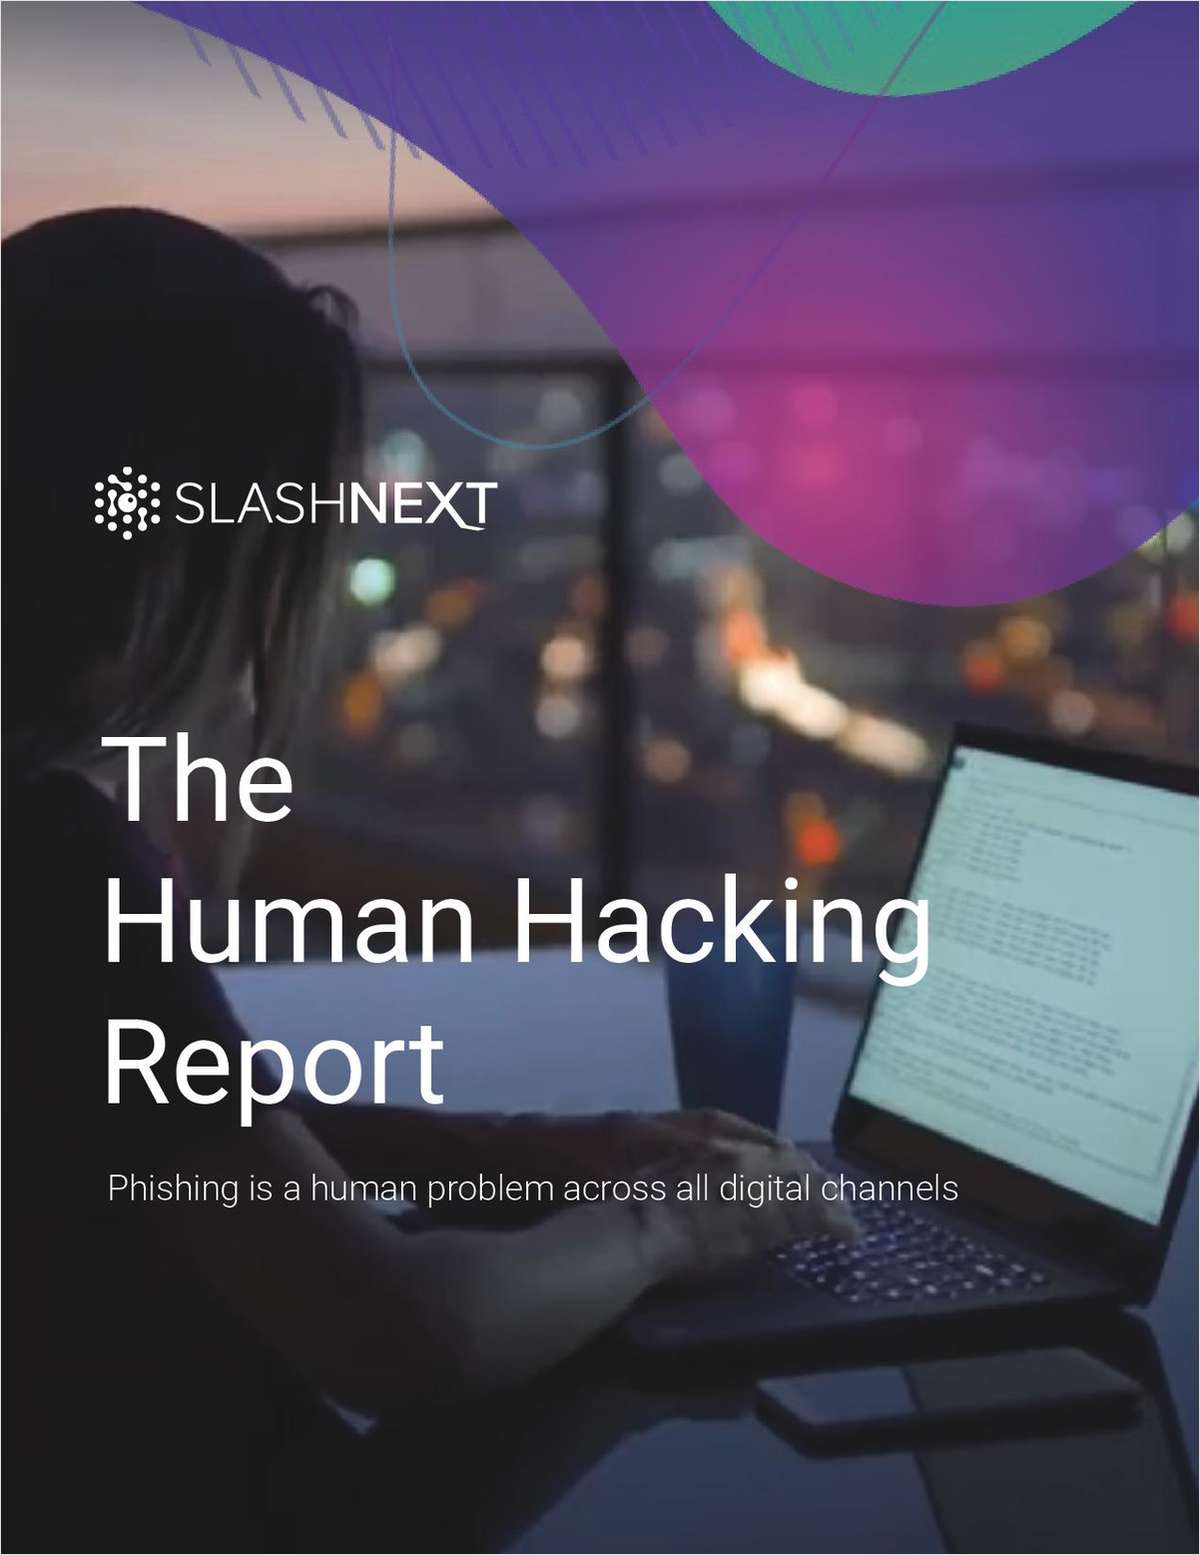 The Human Hacking Report